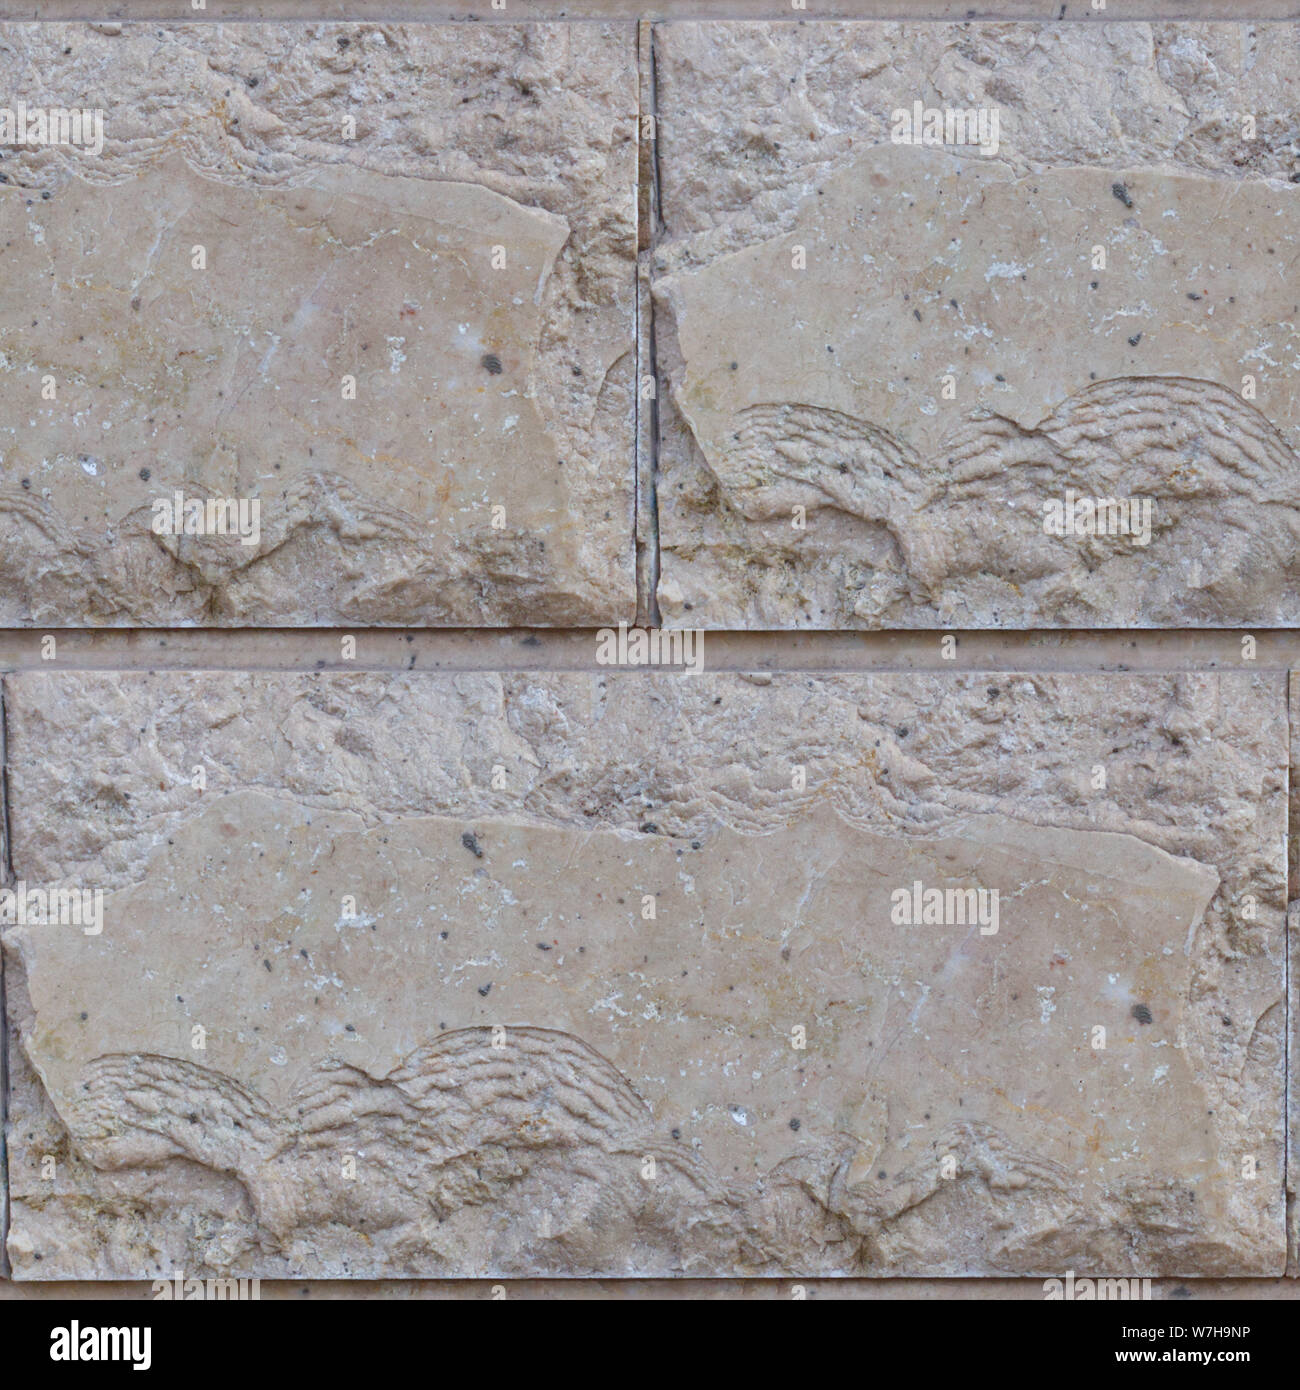 Abstract seamless photo pattern for designers or developers. Old natural stone masonry with fragments natural rhombus. Stock Photo